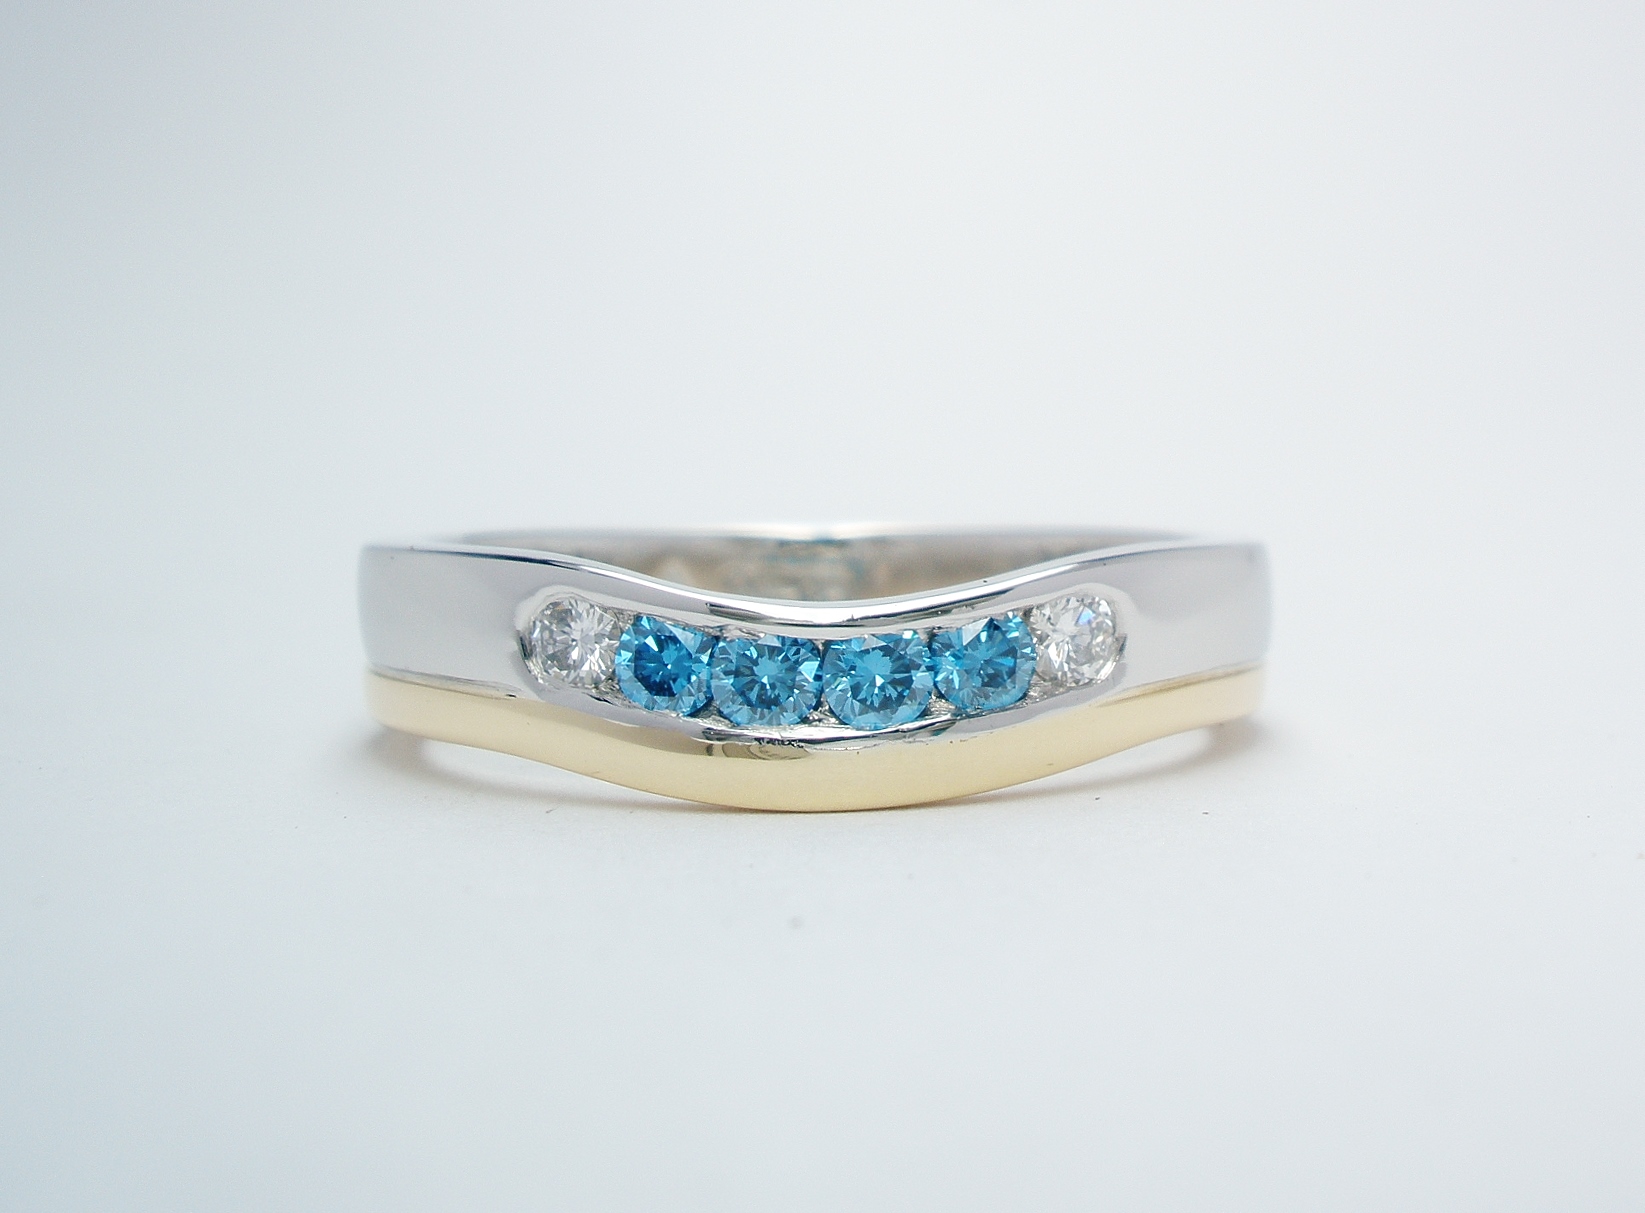 A platinum and 18ct. yellow gold wedding ring shaped to fit around a 3 stone diamond engagement ring and channel set with 4 sky blue & 2 white round brilliant cut diamonds.